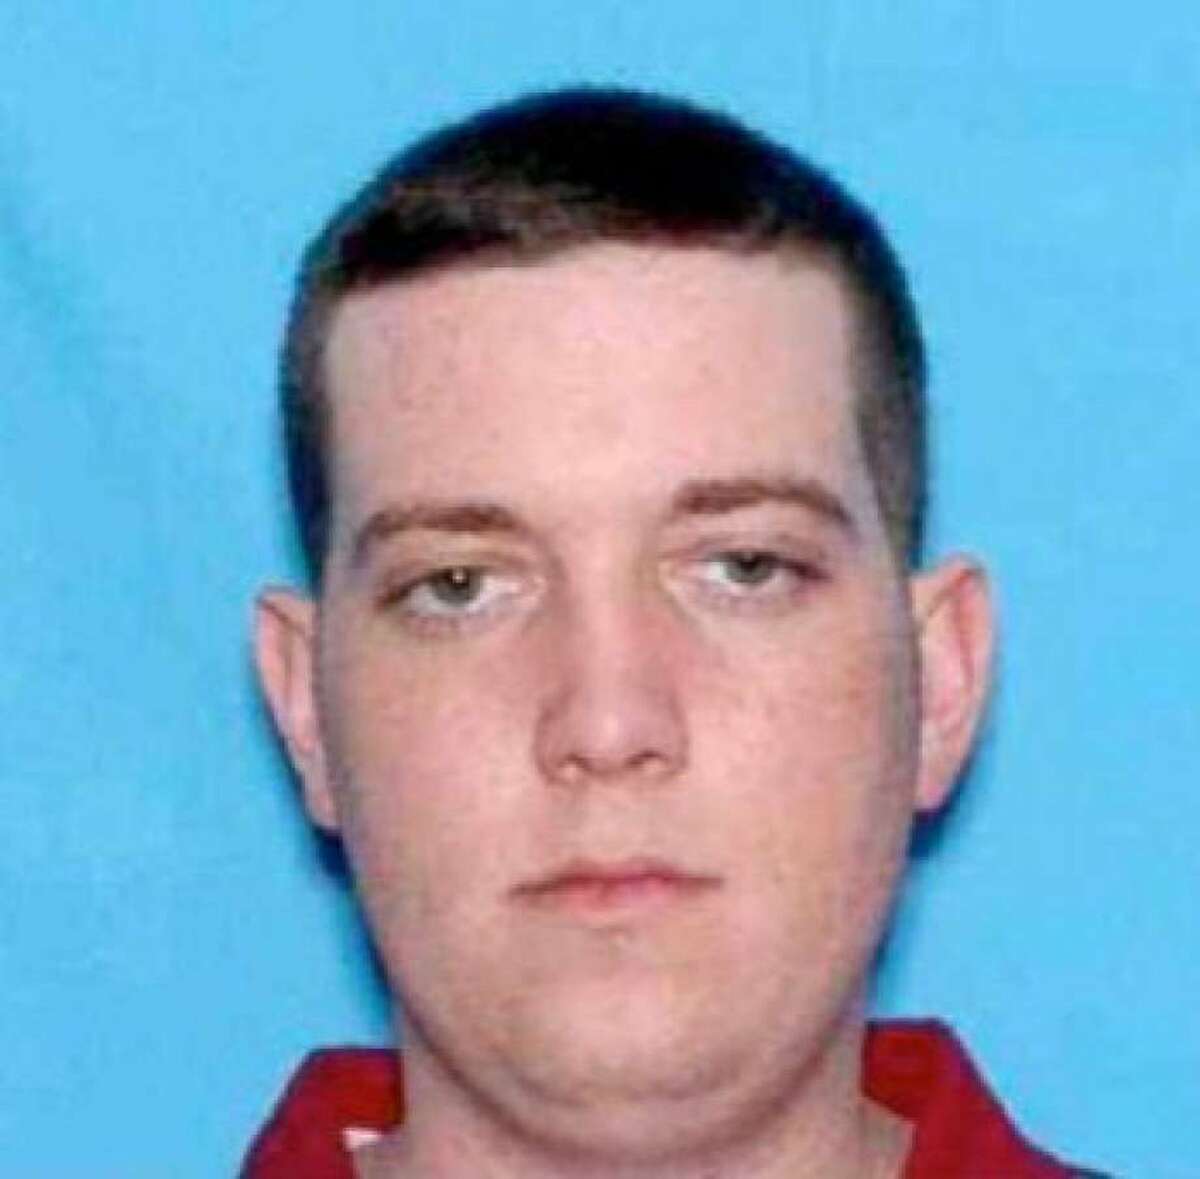 This undated photo, provided by Rohnert Park Police, shows Jeffrey Boyce. Three years ago, Boyce fatally shot a California woman at a scenic overlook on the Oregon coast, using one of three weapons purchased by his mother. The mother of Boyce has agreed to pay $400,000 to the family of the murdered woman and to assist them in their lawsuit against two gun dealers. (Rohnert Park Police via AP)